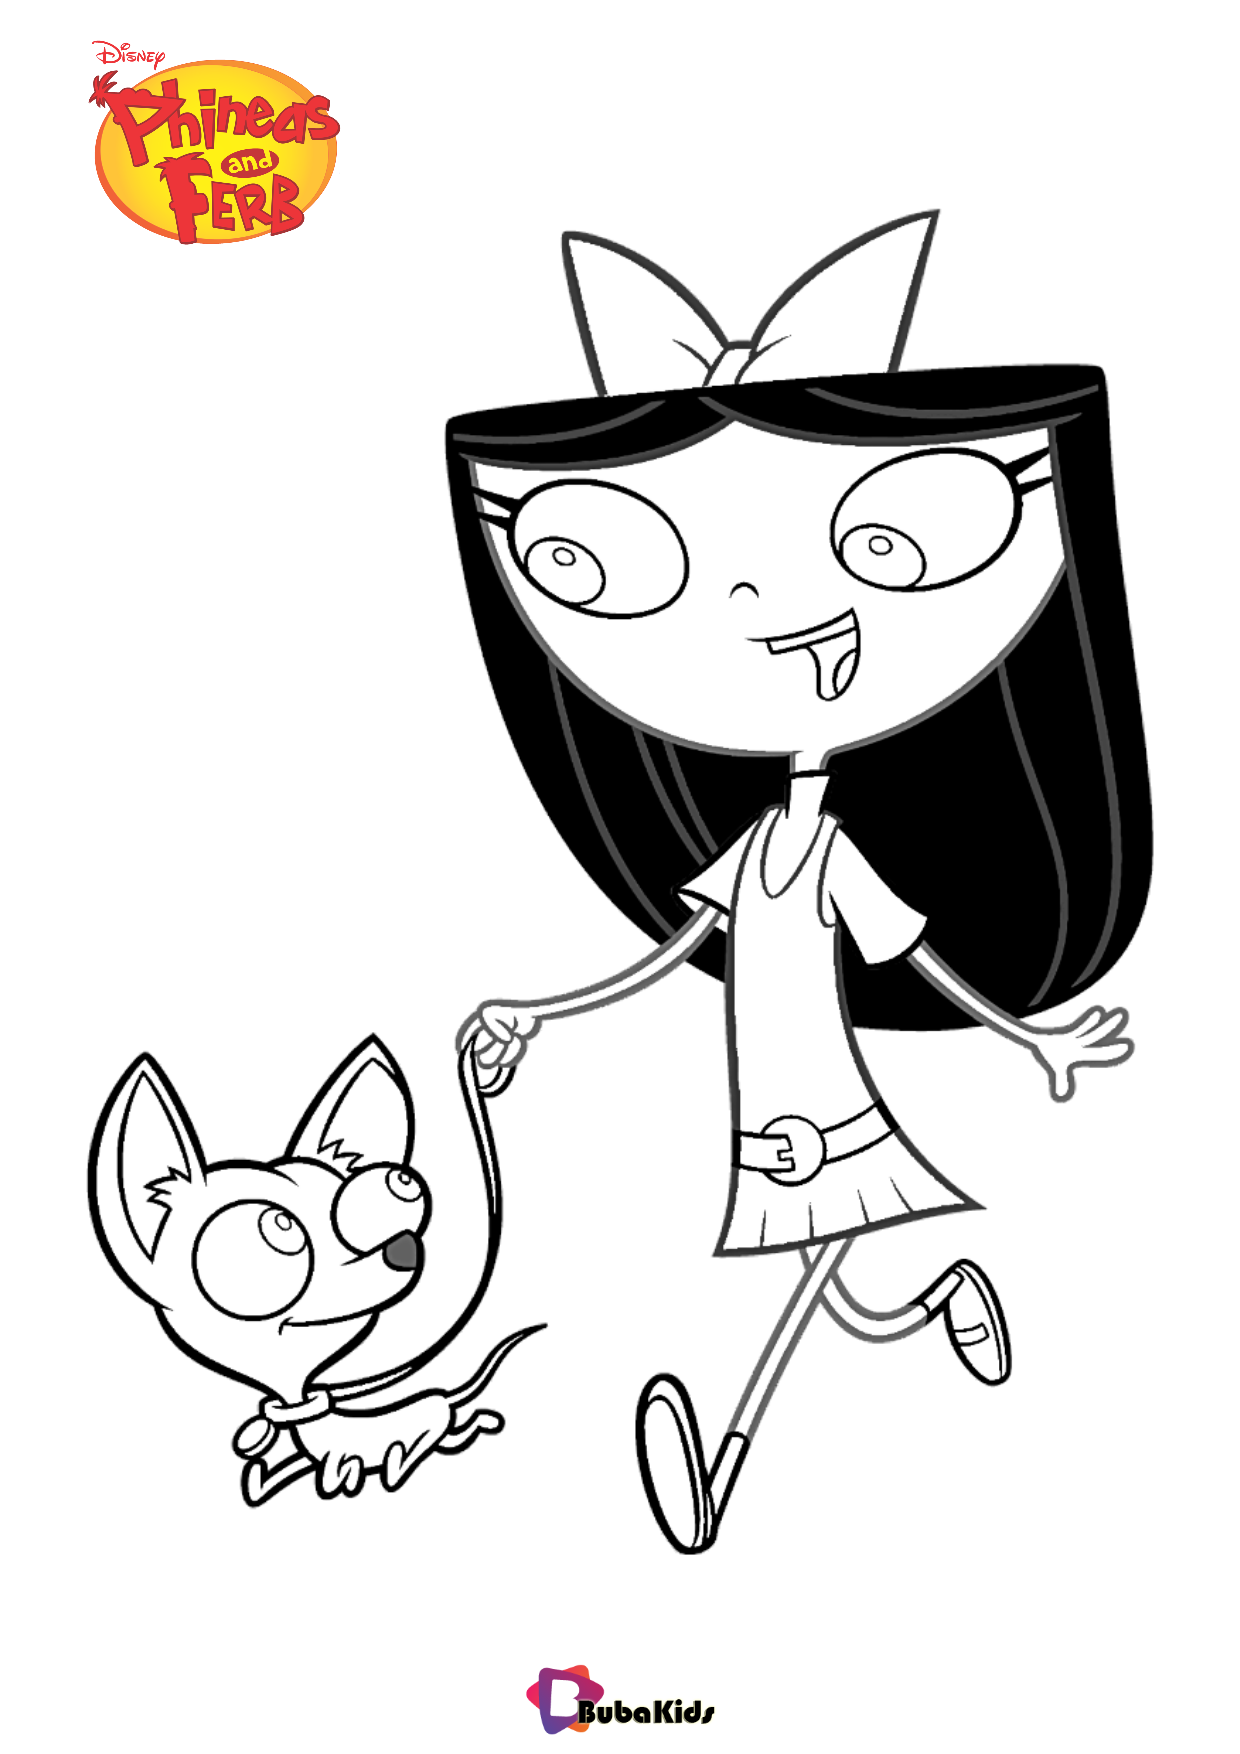 Isabella Garcia-Shapiro Phineas and Ferb coloring page Wallpaper